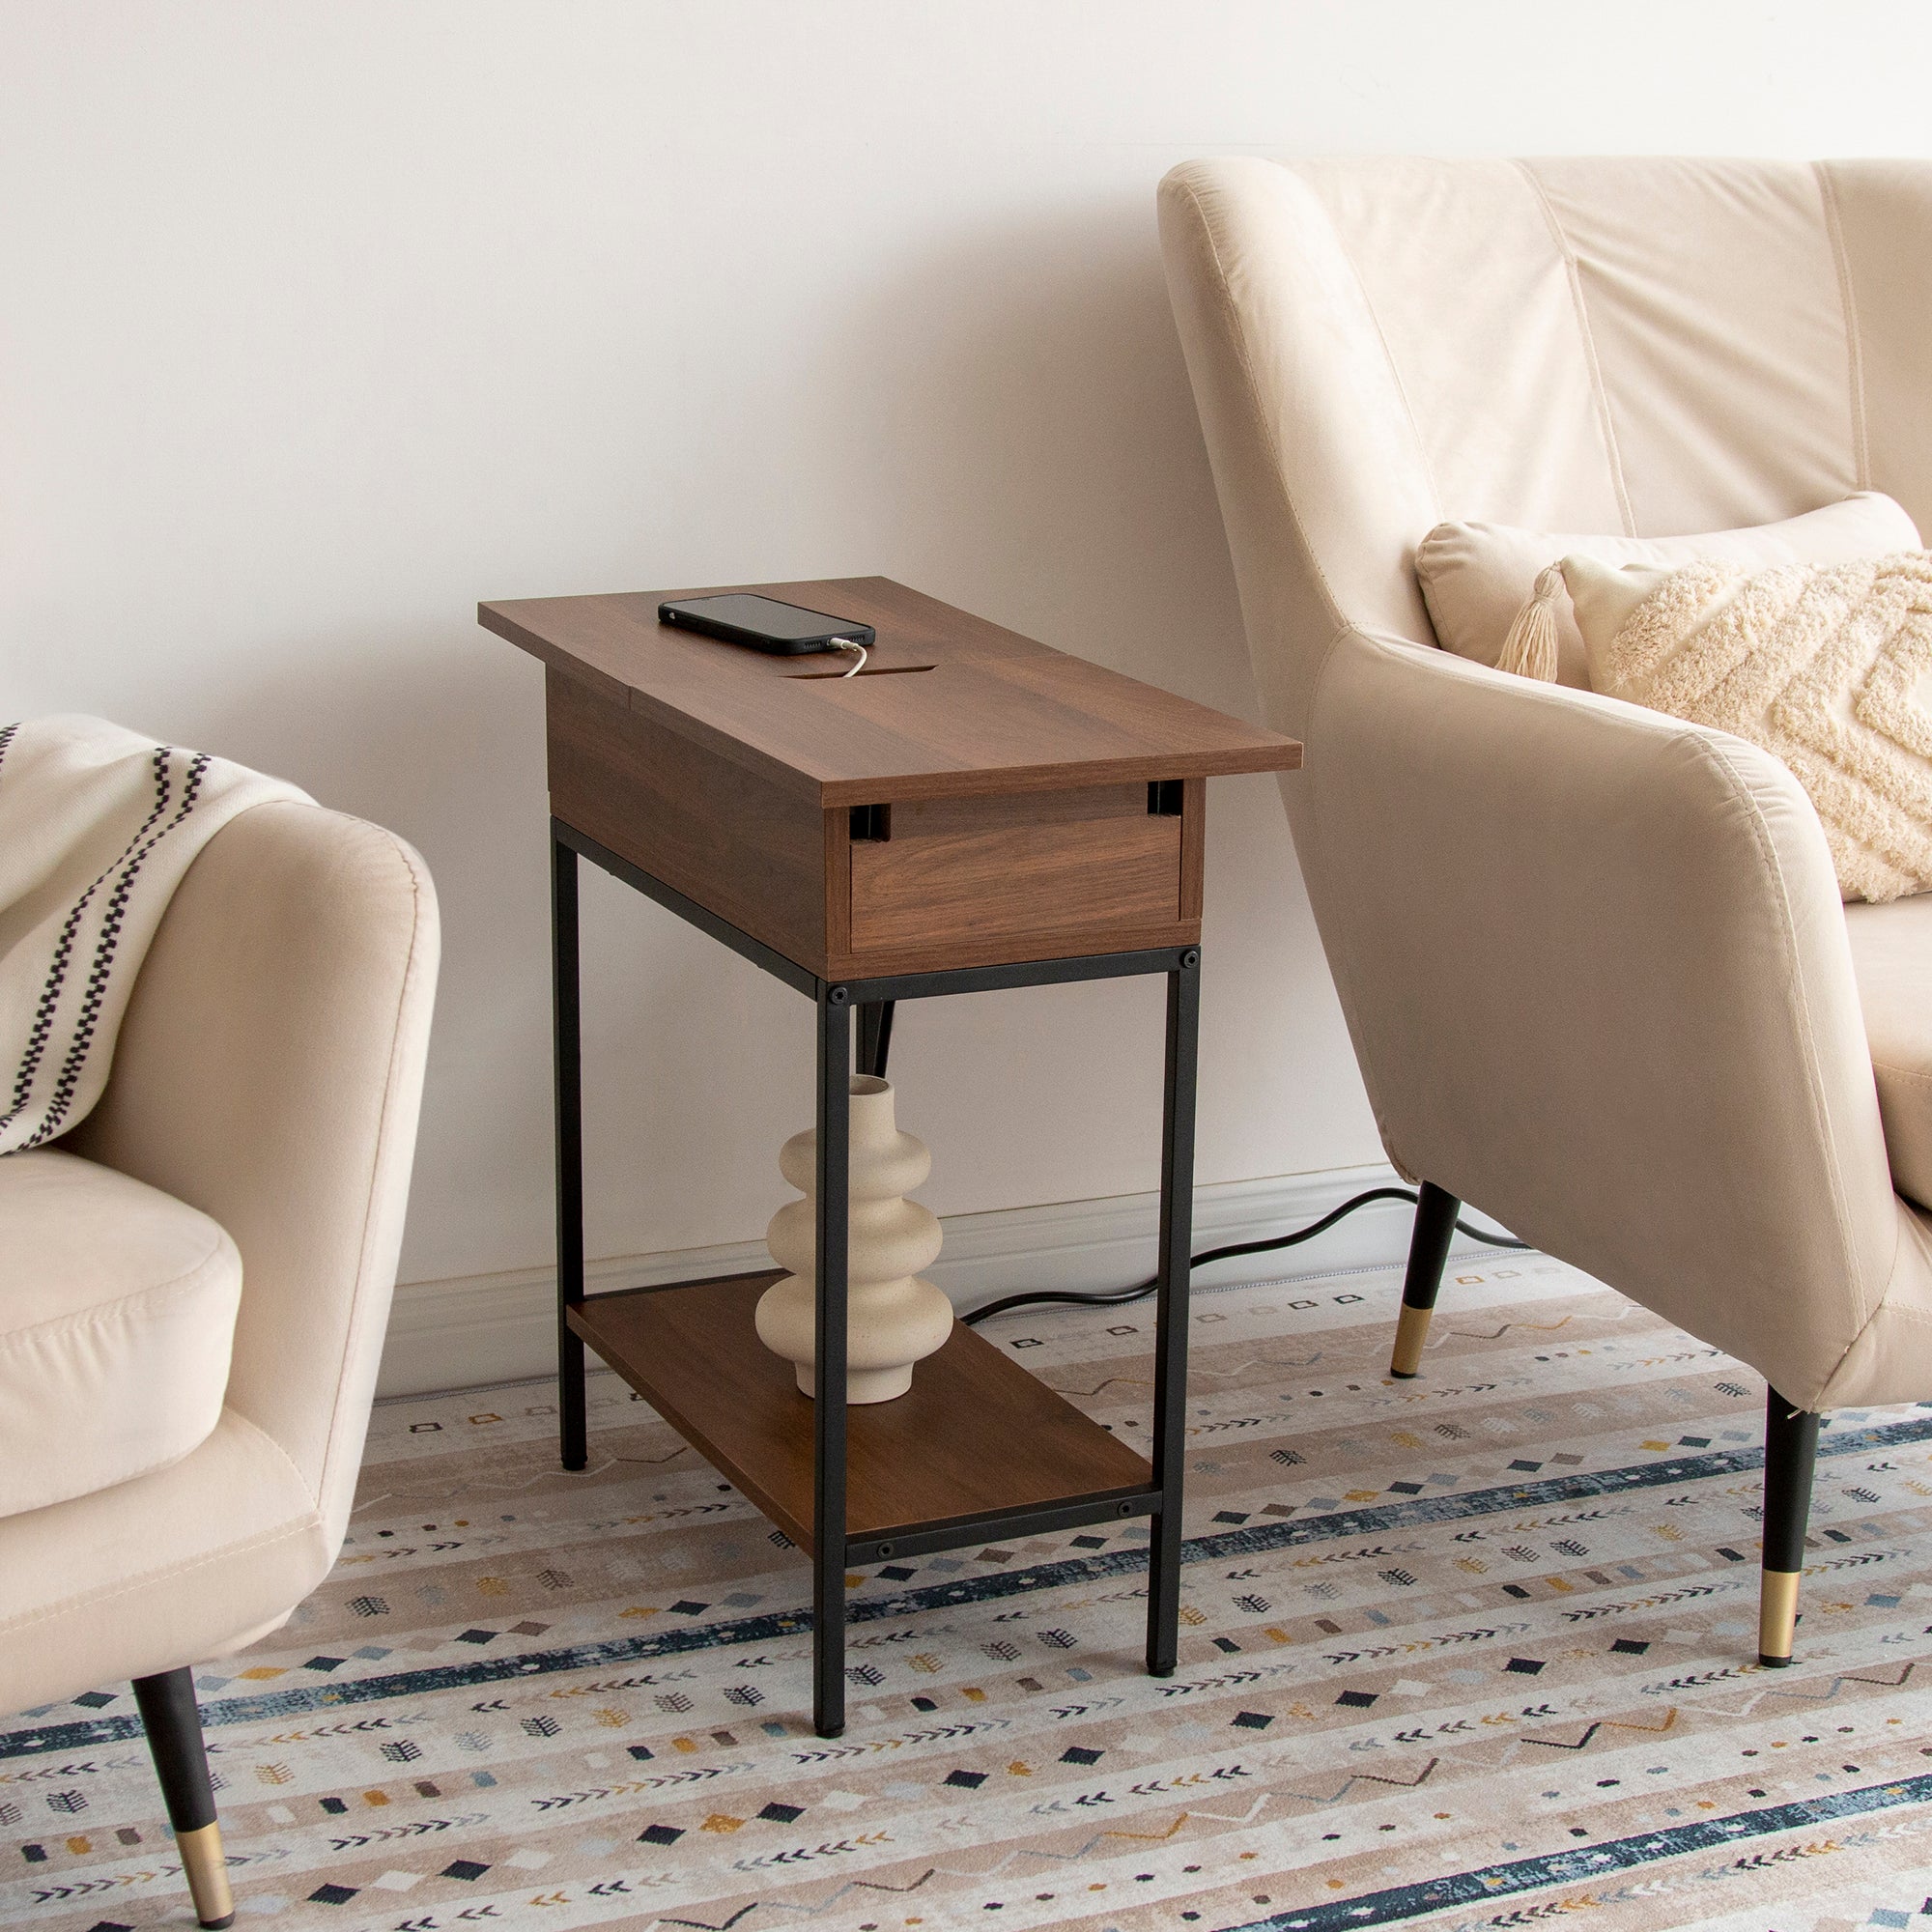 Flip Top End Table with Storage and Built-In Outlets